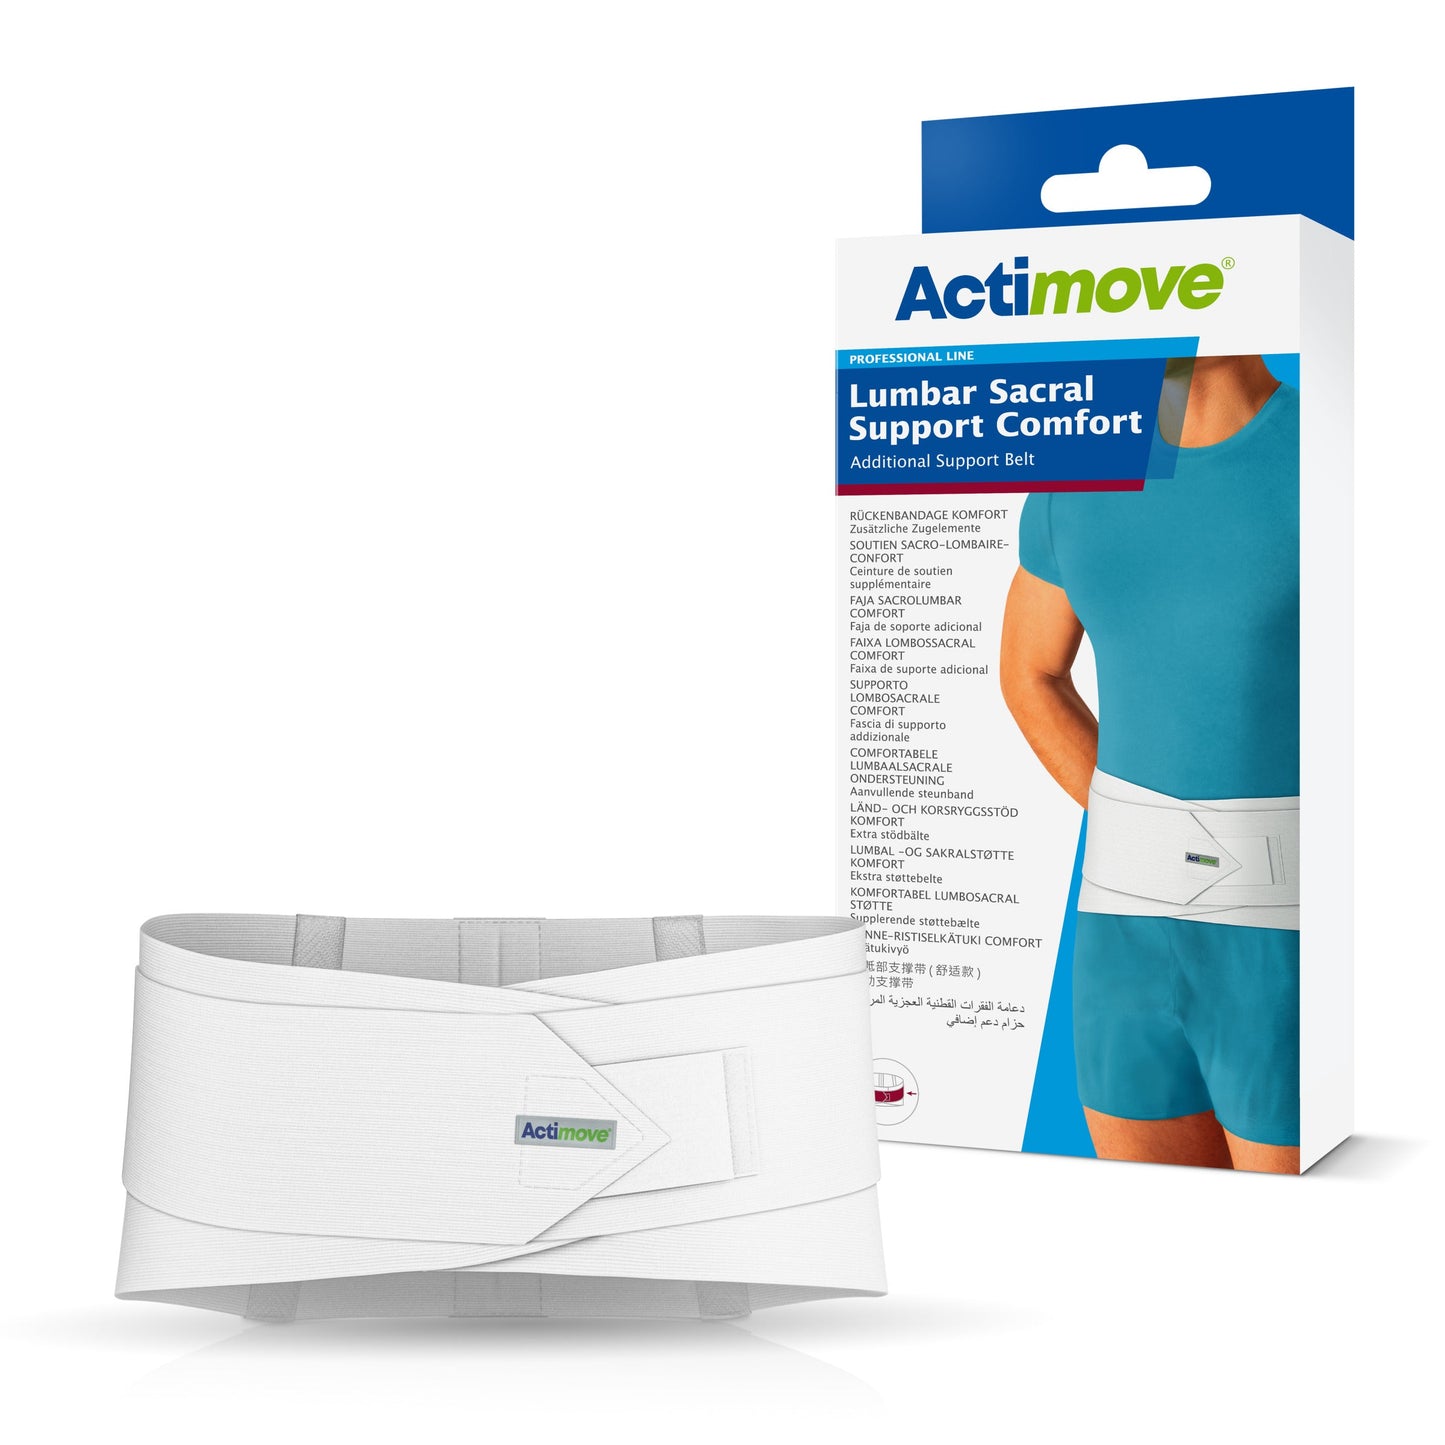 Jobst Actimove Professional Line Lumbar Sacral Support Comfort with Additional Support Belt